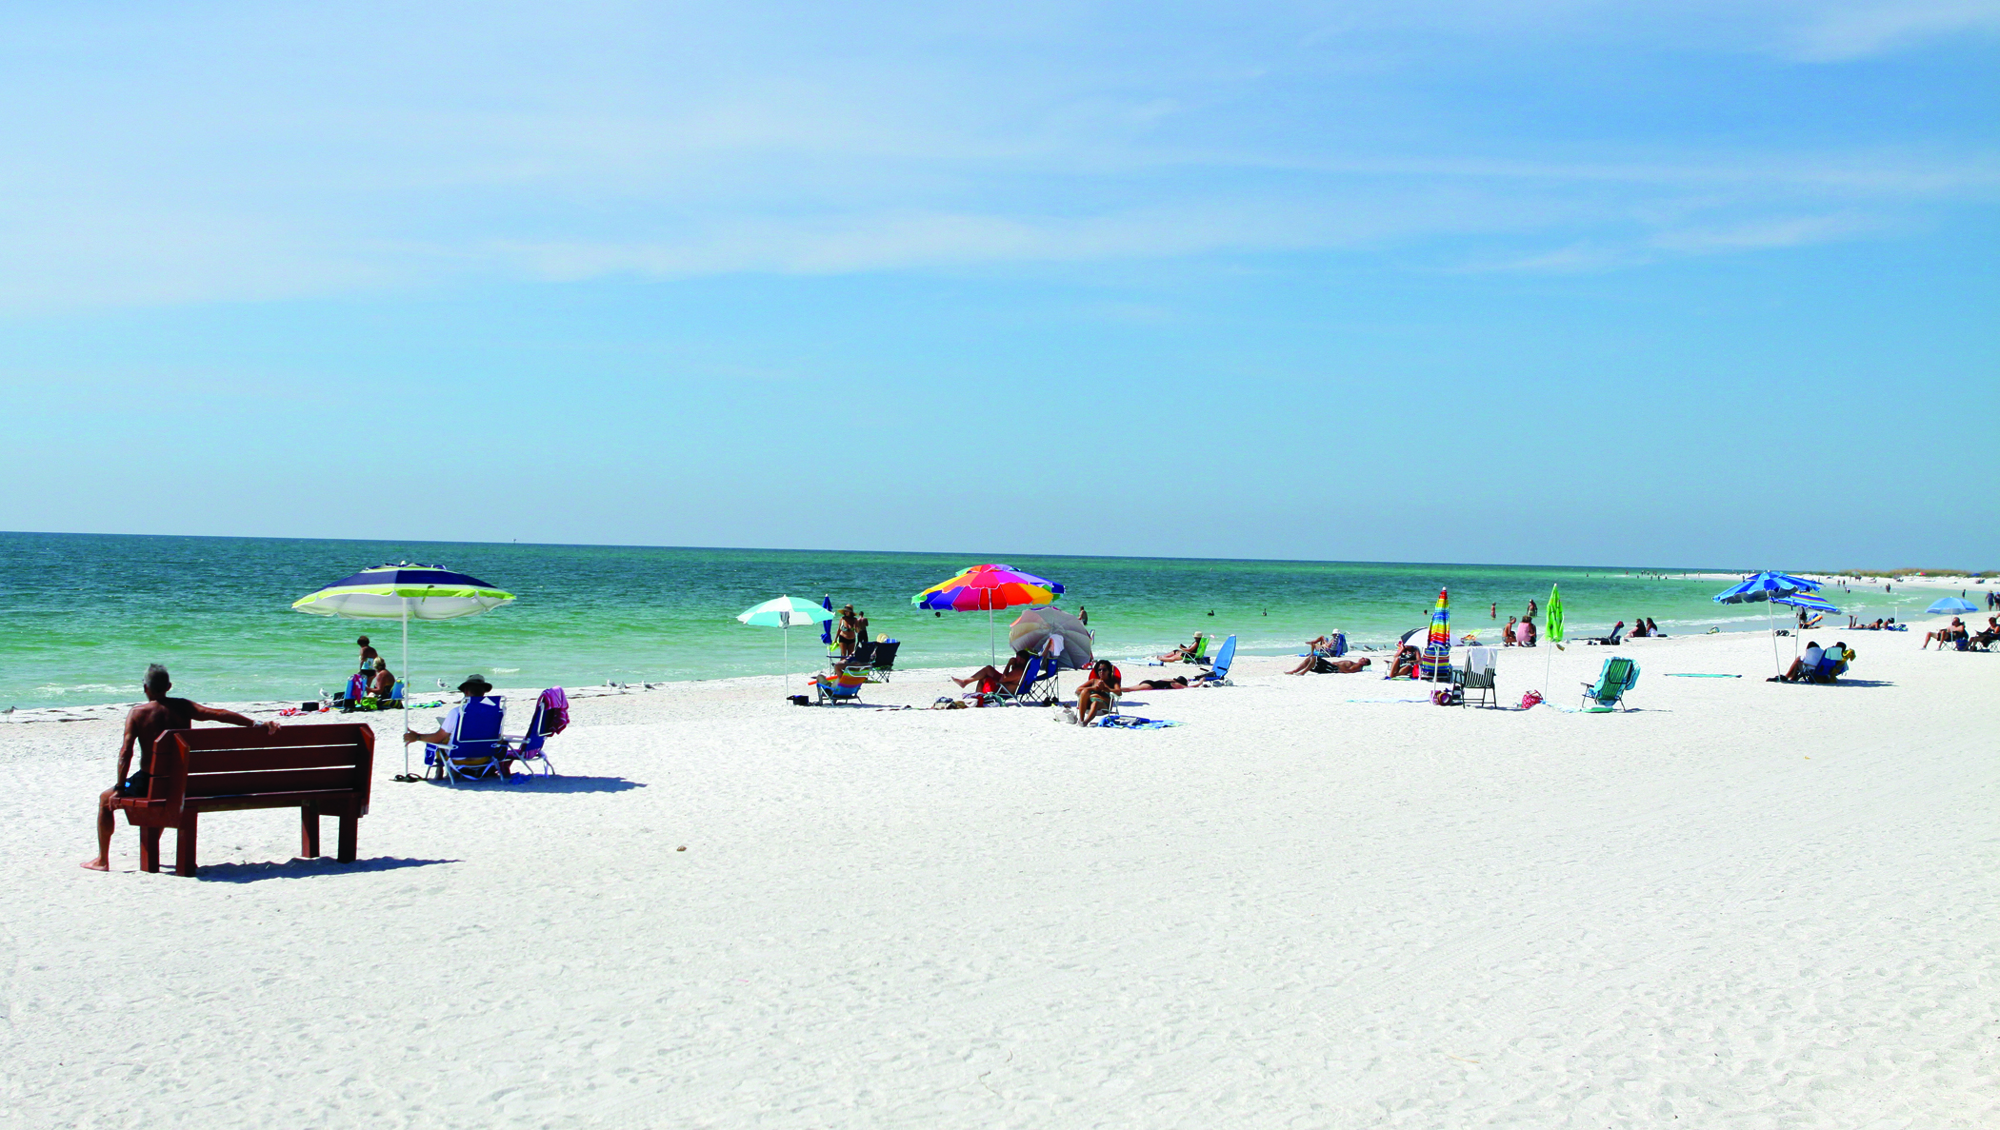 The city hopes the county will be amenable to continuing to provide support for facilities such as Lido Beach.